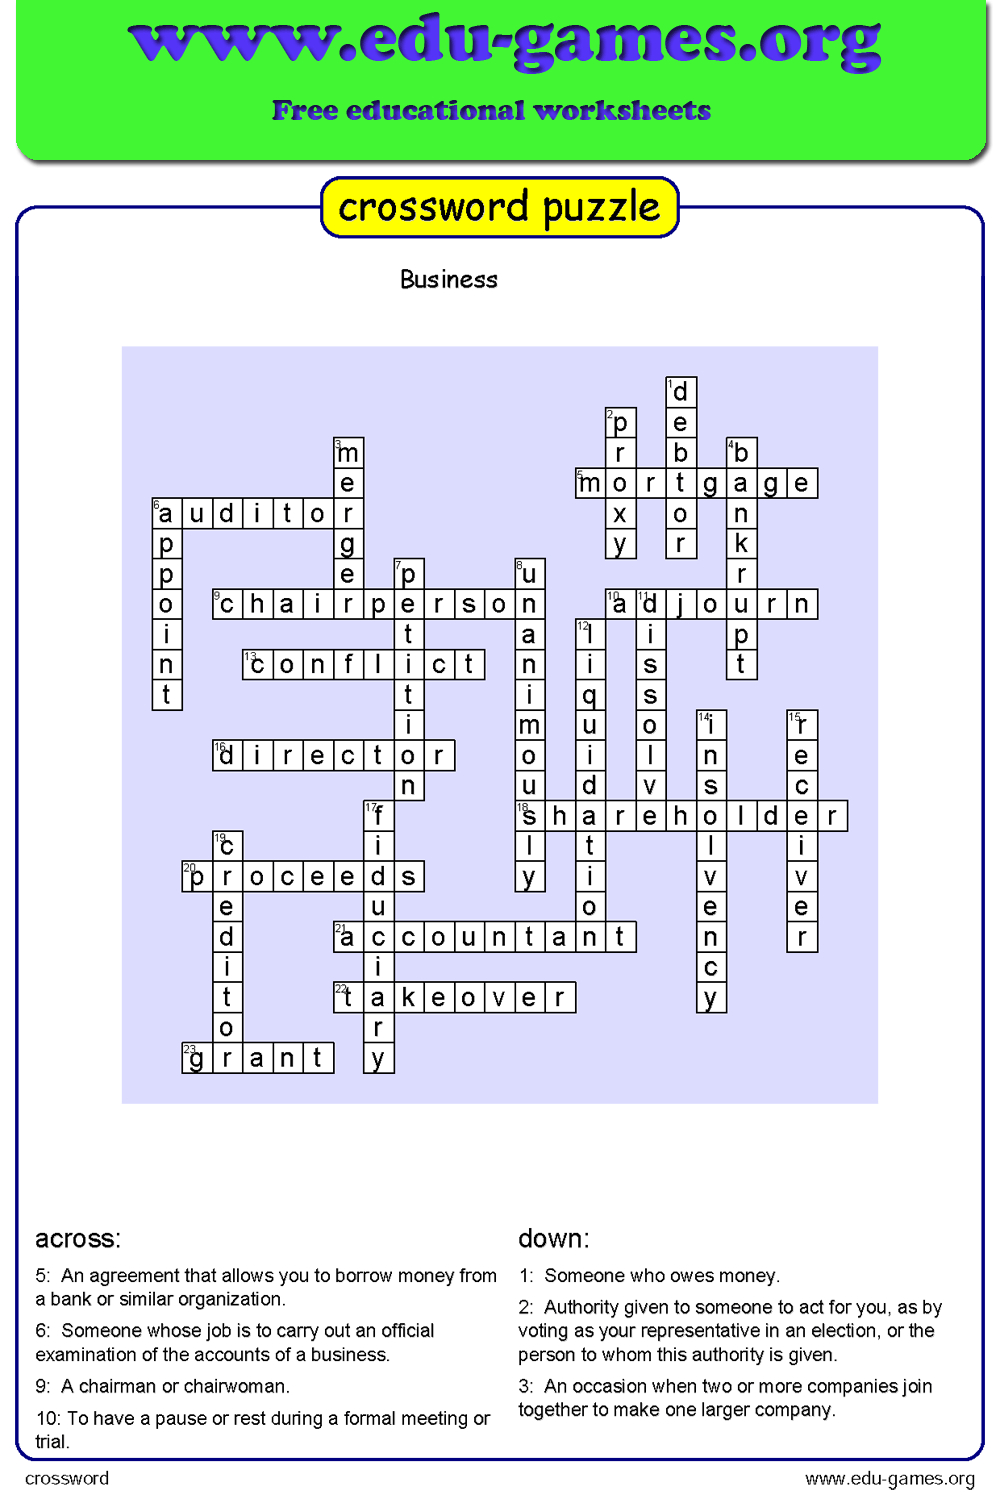 Free Crossword Maker For Kids - The Puzzle Maker Site - Create Your Own Crossword Puzzle Printable